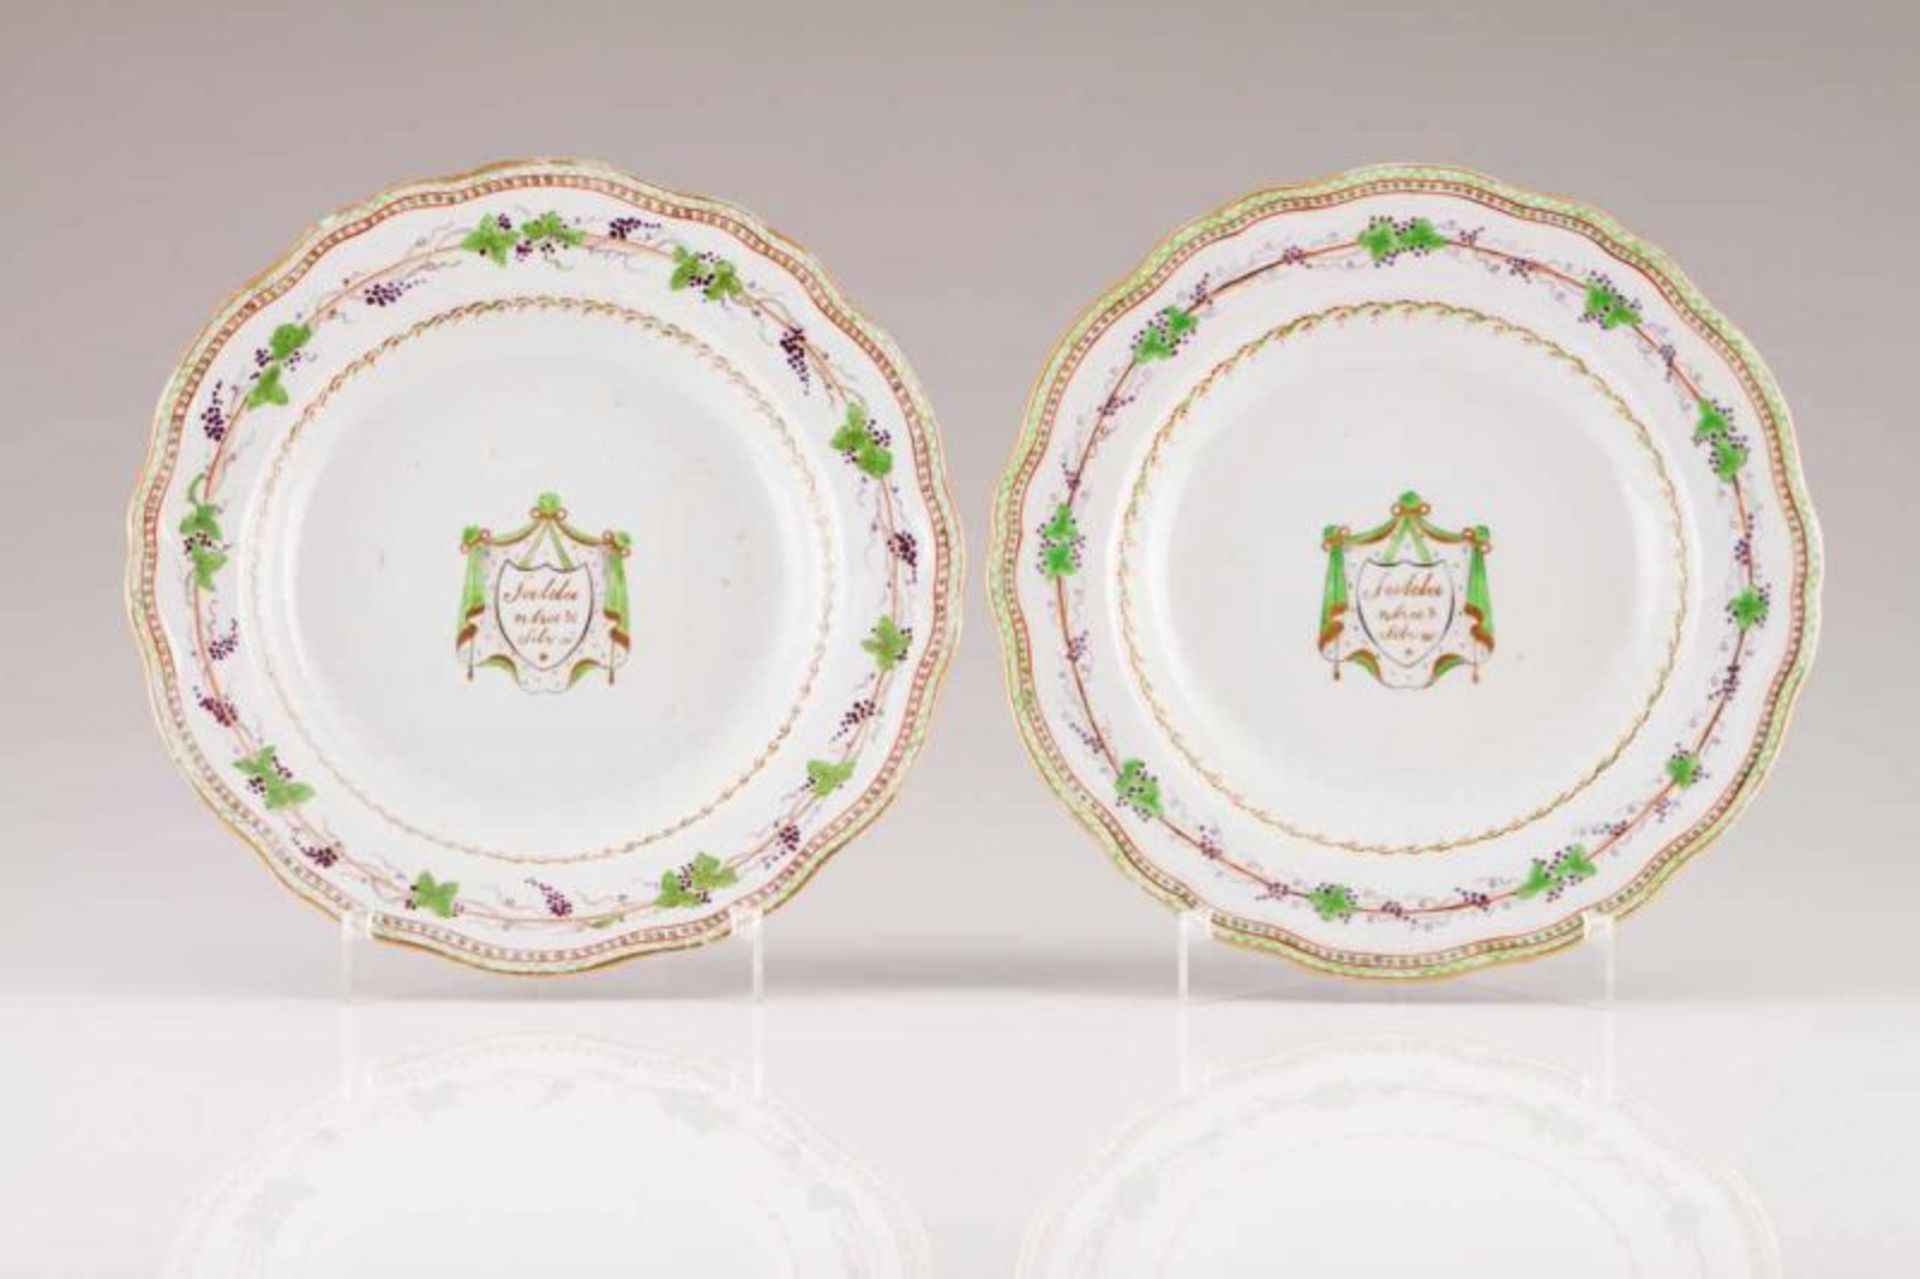 A pair of scalloped soup plates Chinese export porcelain Polychrome and gilt decoration, depicting